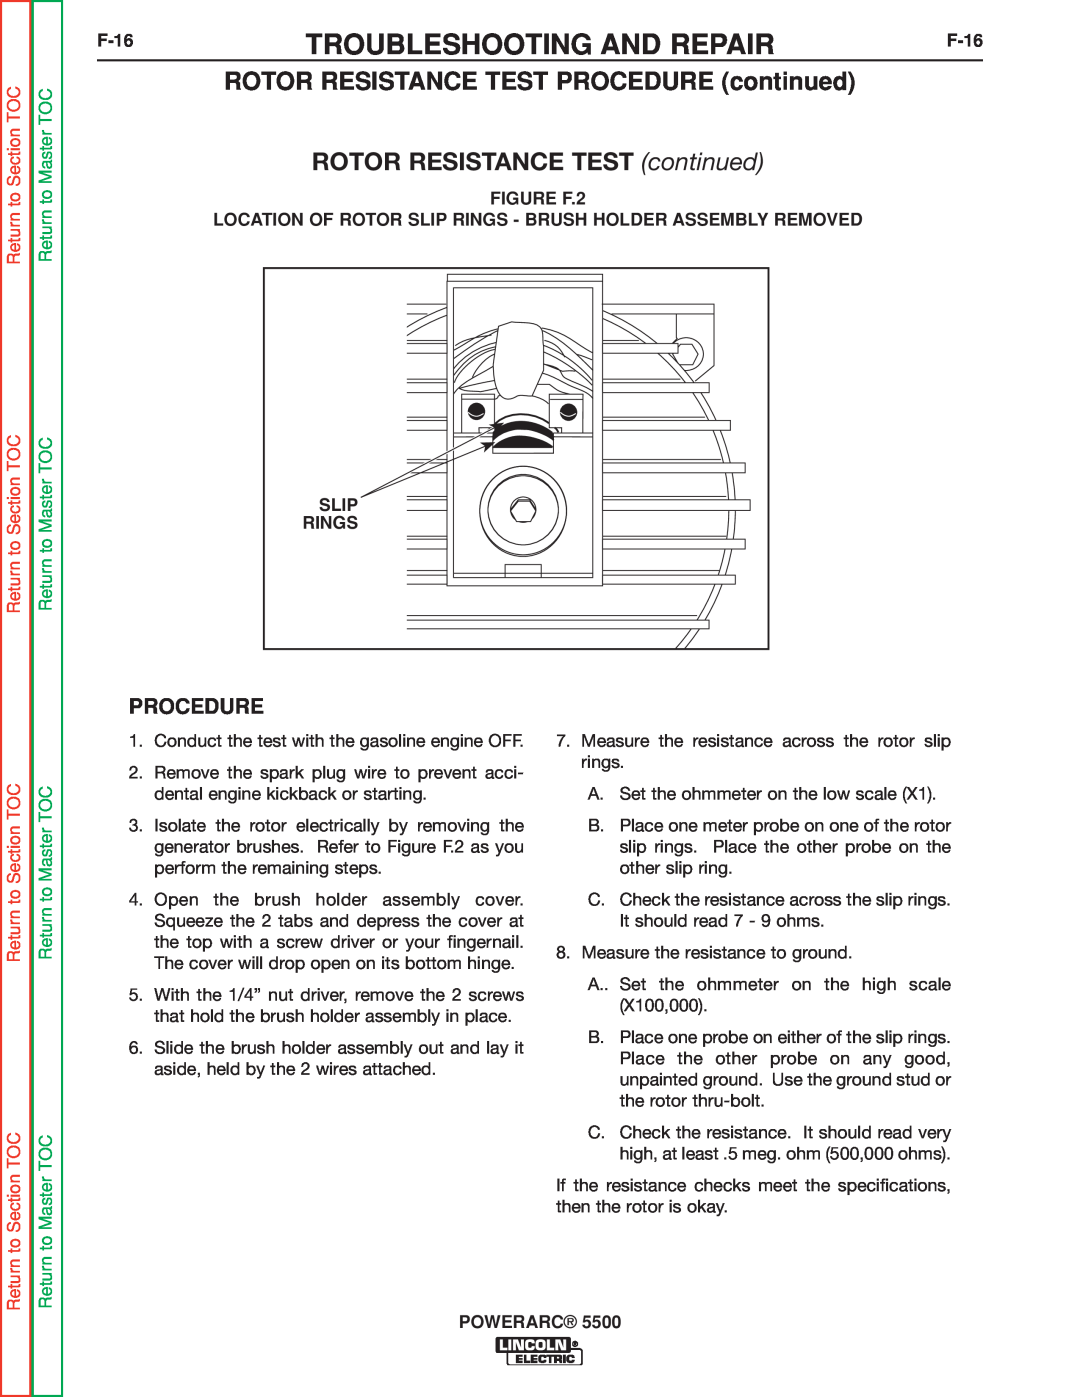 Lincoln Electric SVM197-A ROTOR RESISTANCE TEST PROCEDURE continued, ROTOR RESISTANCE TEST continued, Procedure, F-16 